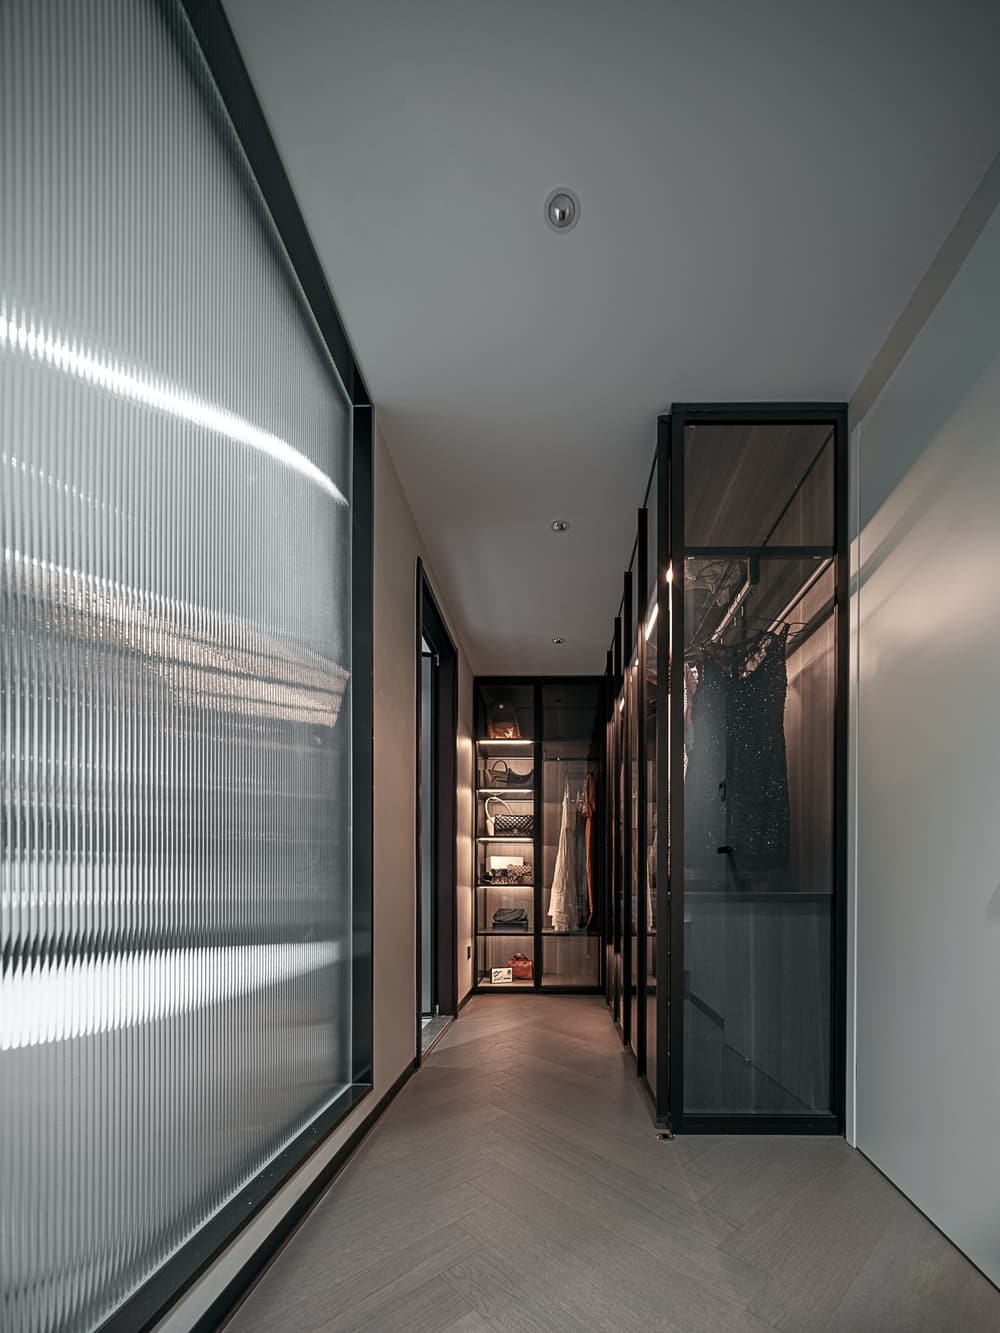 Honor Maison - Wang Rui’s Latest Private House Project